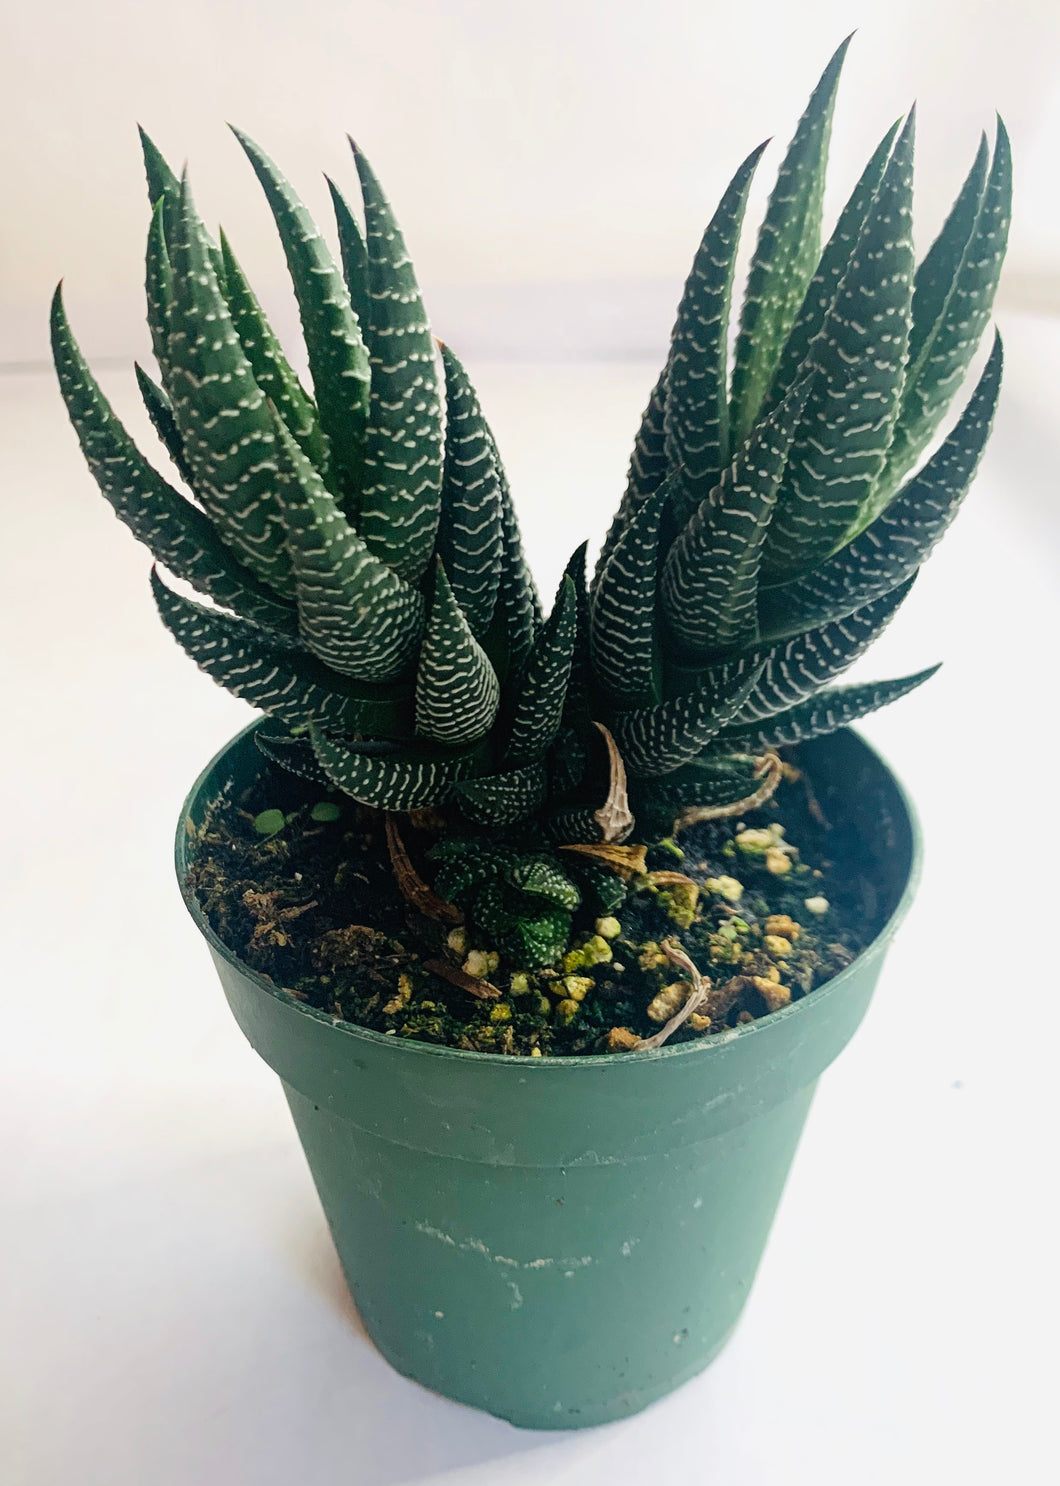 A succulent made up of two towering succulents which form two tall rosettes. The leaves are long and pointed and begin to curl into the center of the rosette. Leaves are green, with horizontal stripes of white dots uniformly appearing throughout.